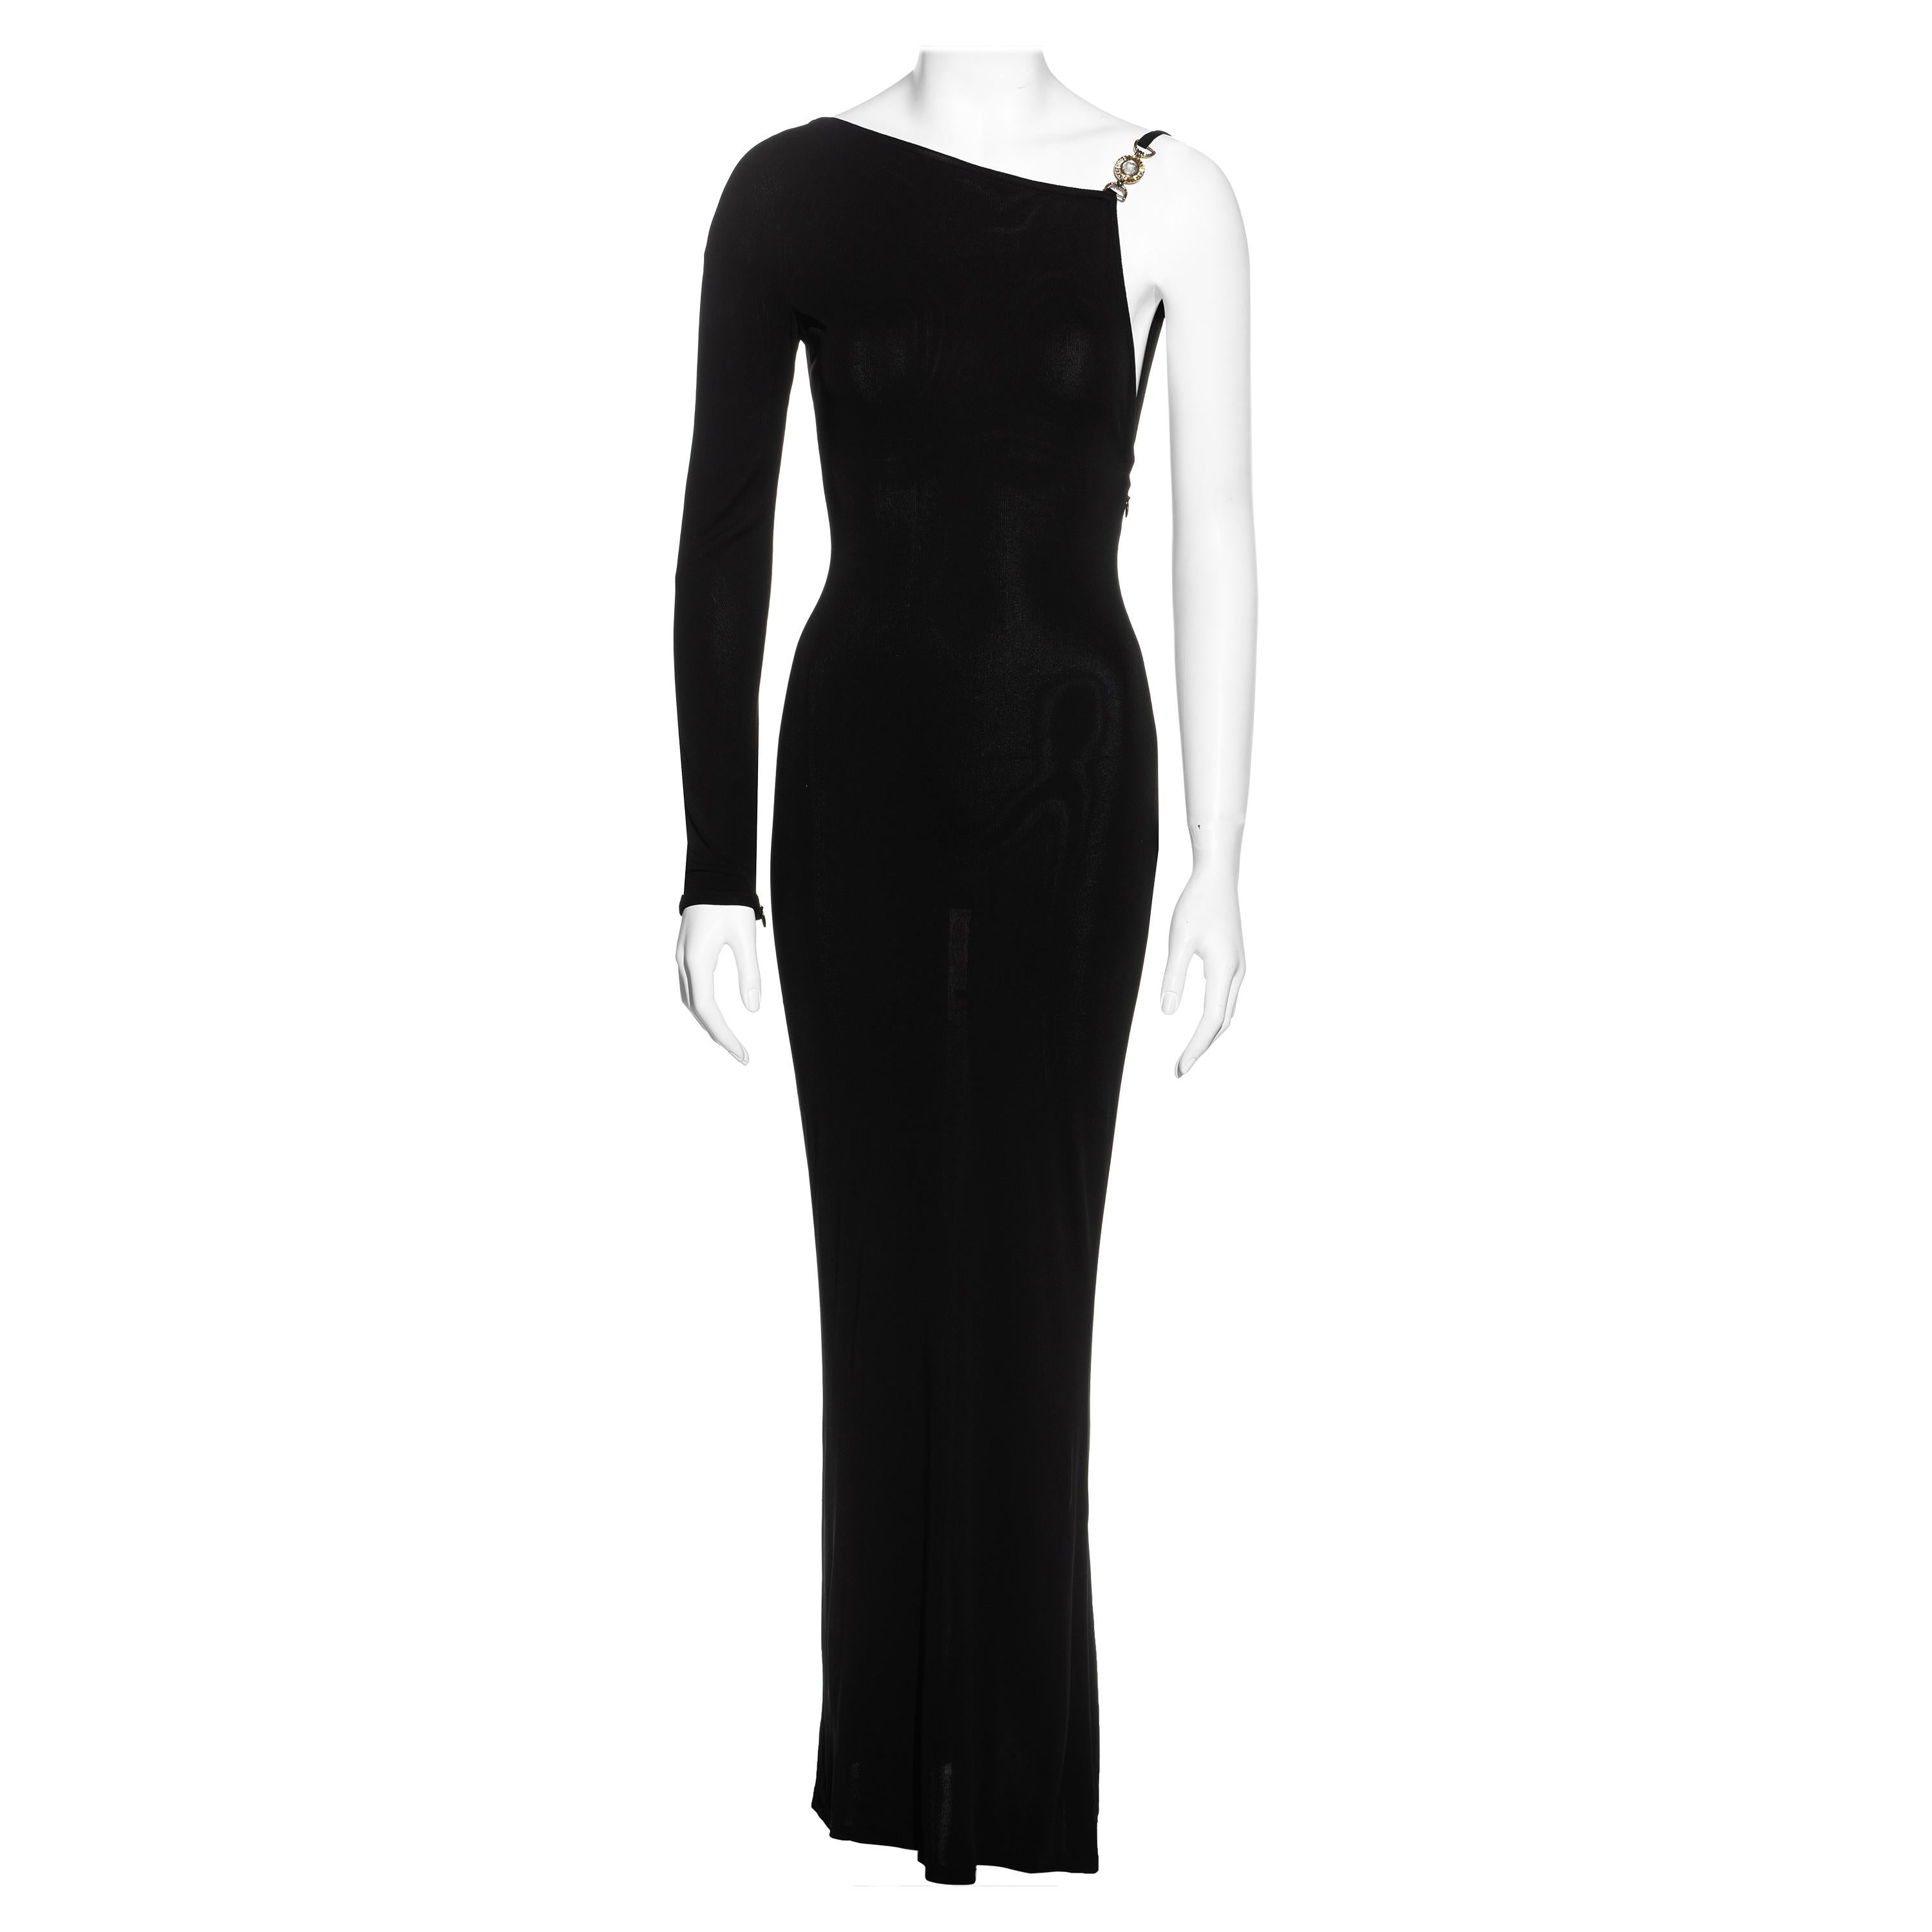 Gianni Versace black rayon one shoulder evening dress, 1996 For Sale